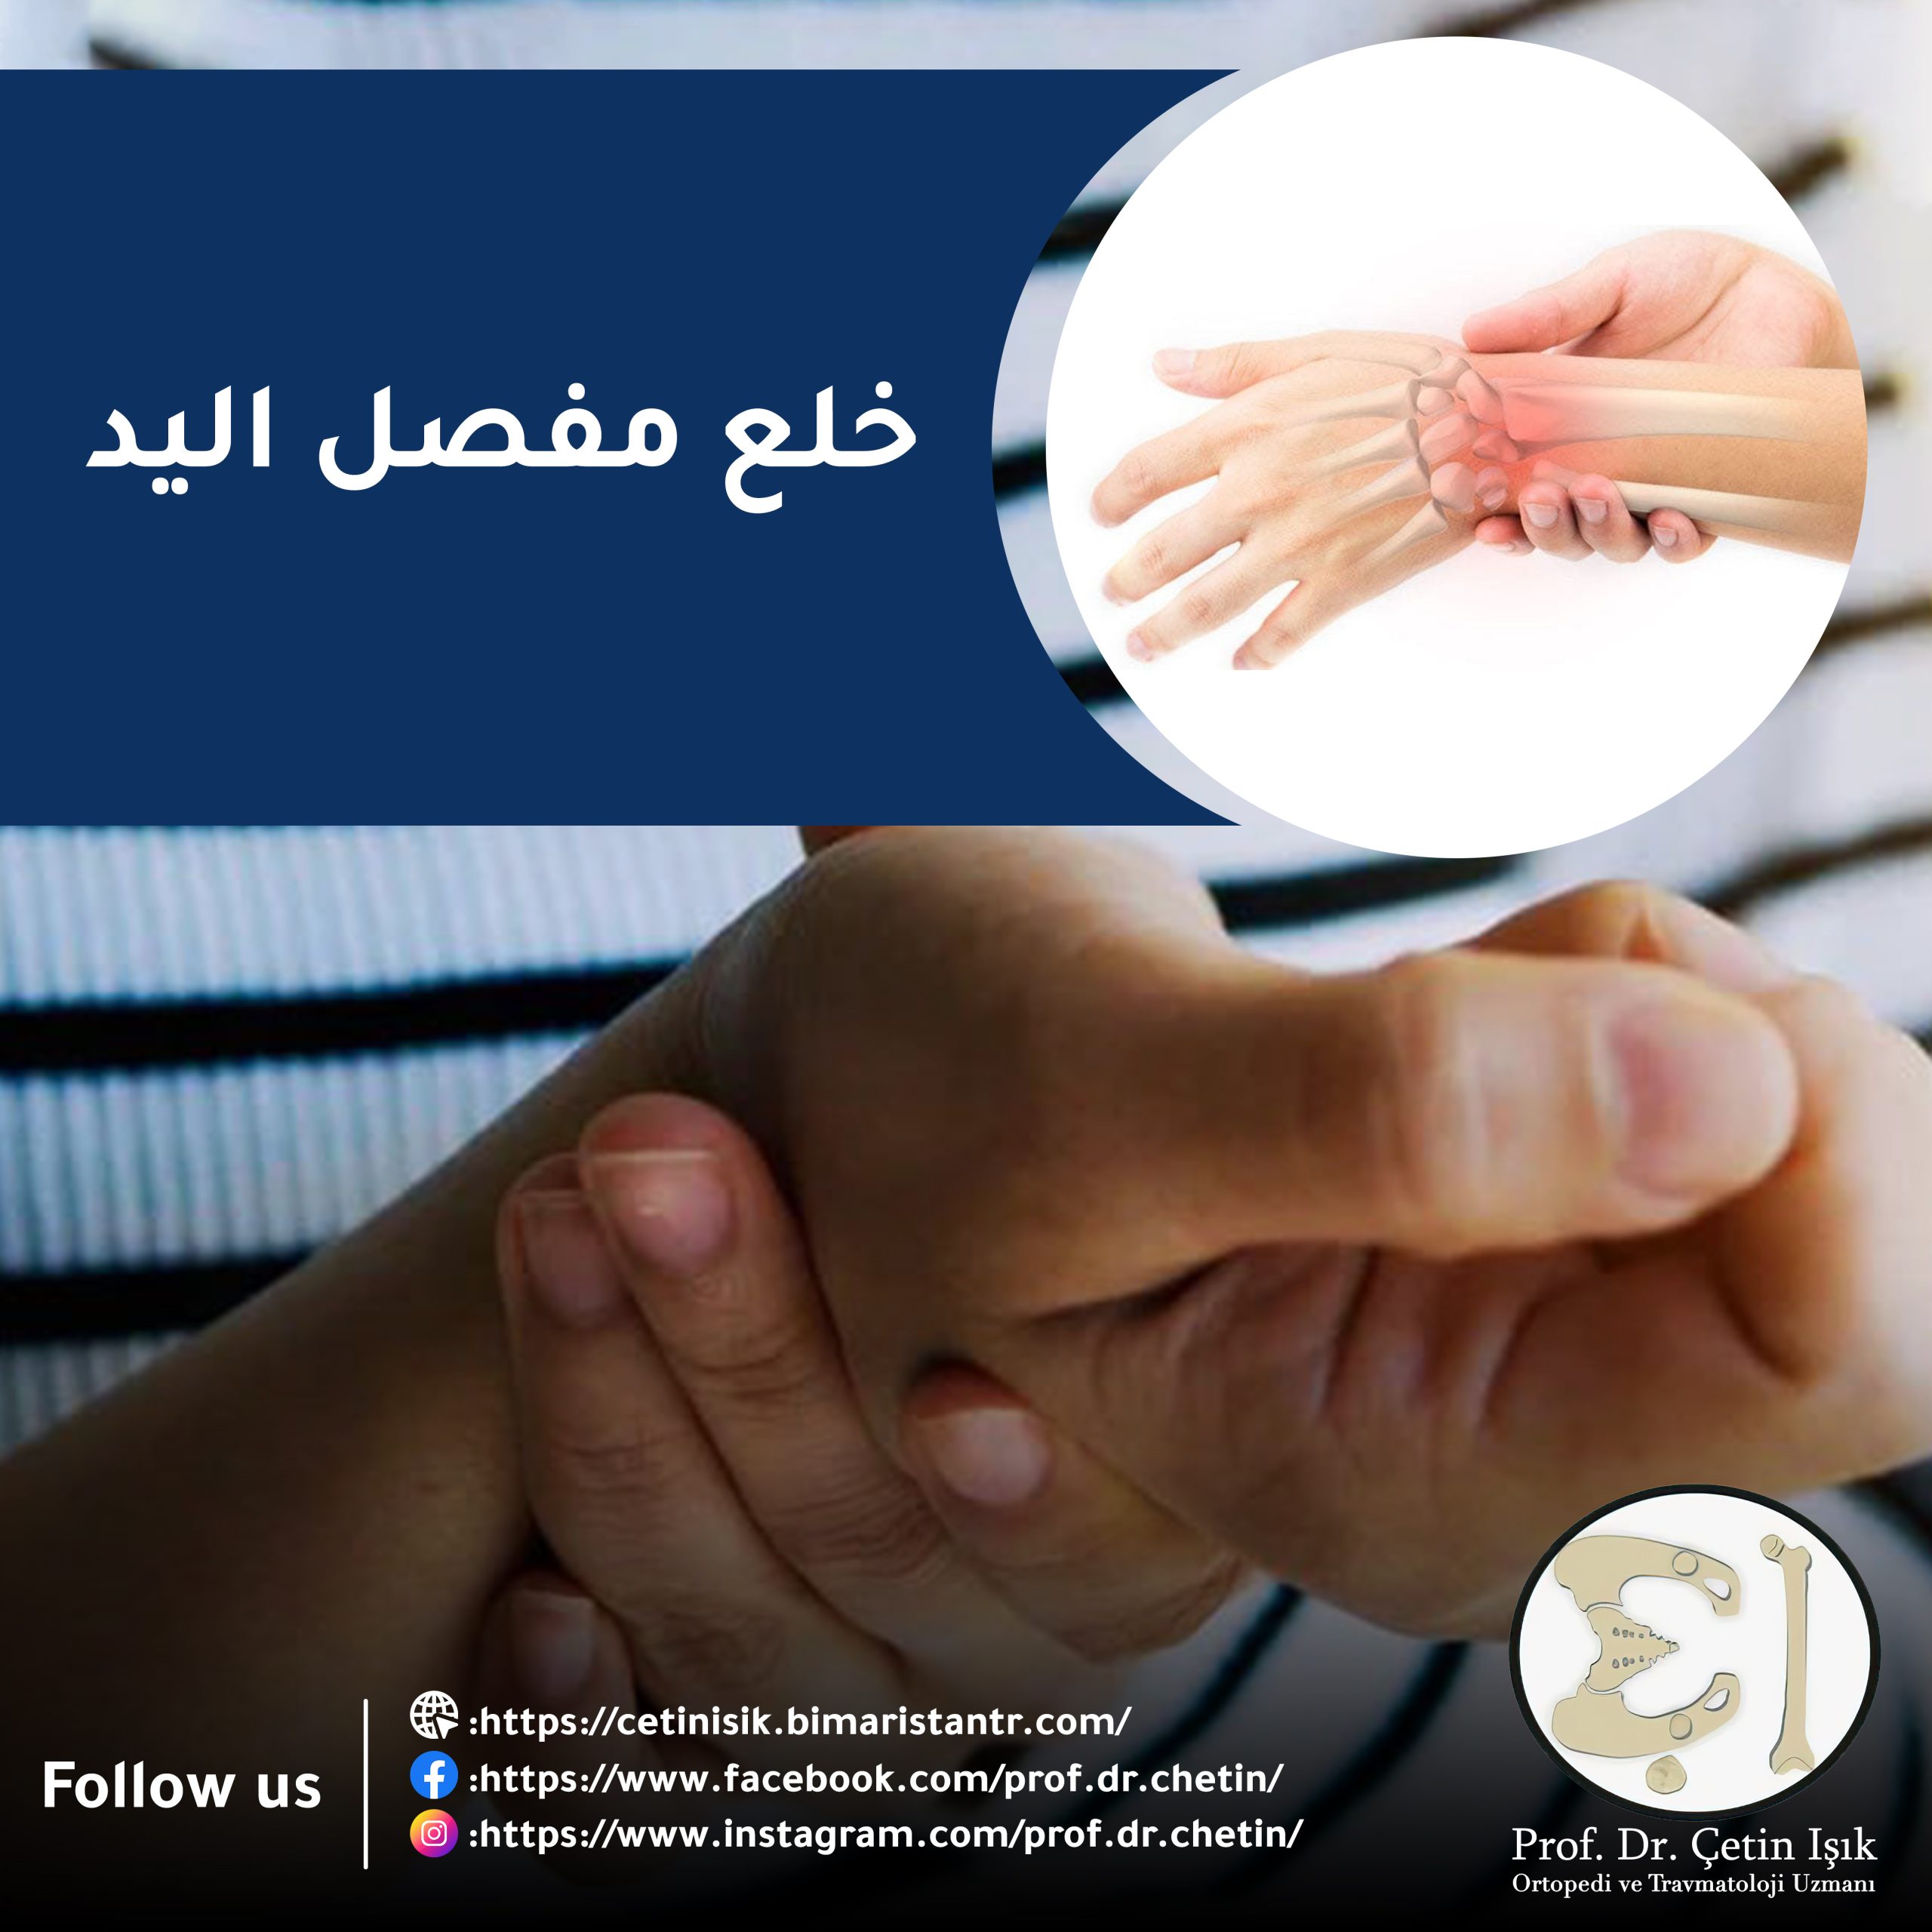 dislocation of the hand joint; From diagnosis to treatment